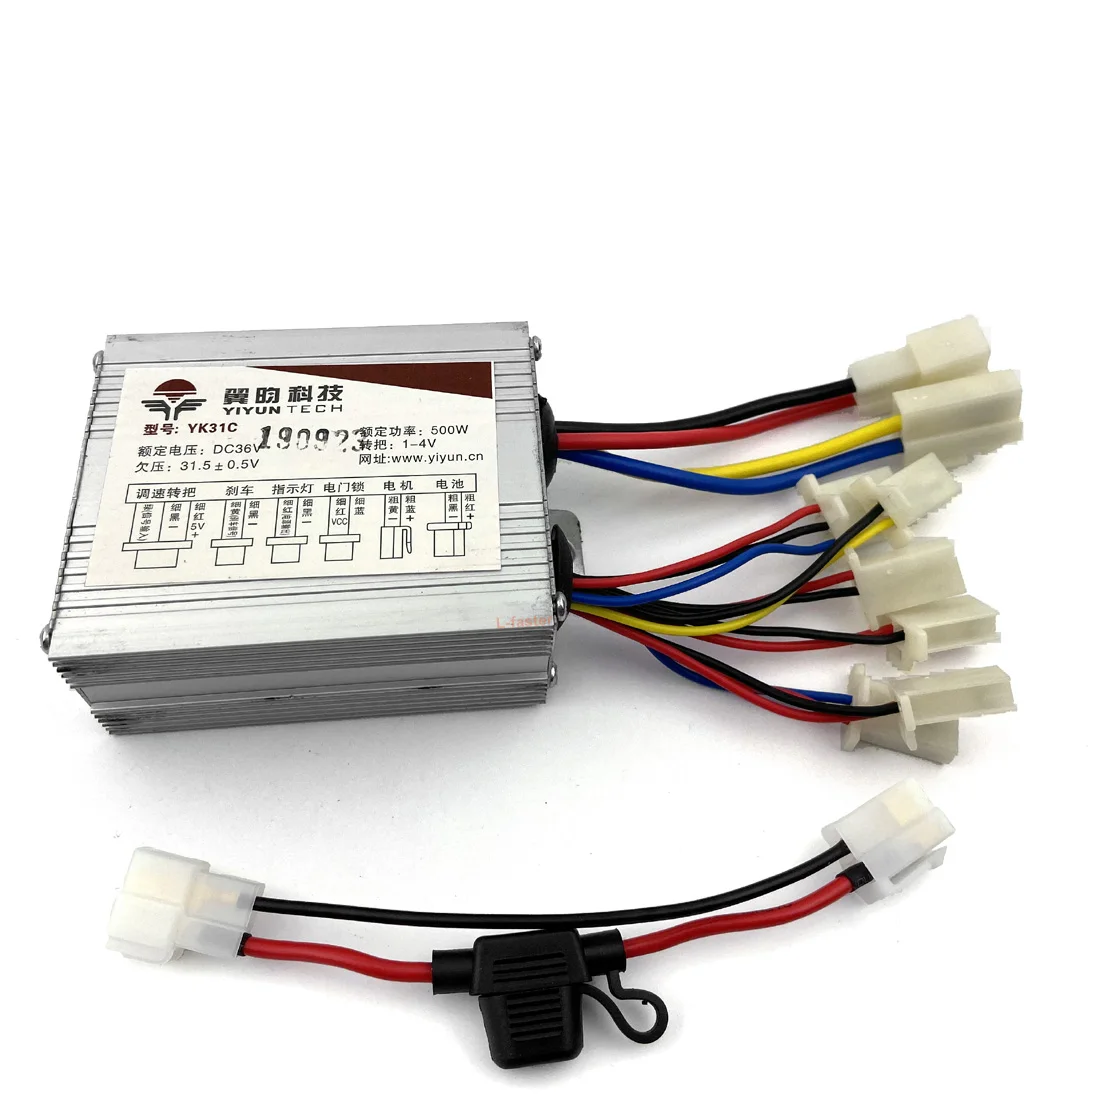 

500W Controller And Fuse Unit 20A Compatible With Our 450W Electric Bike Side-drive Motor Kit